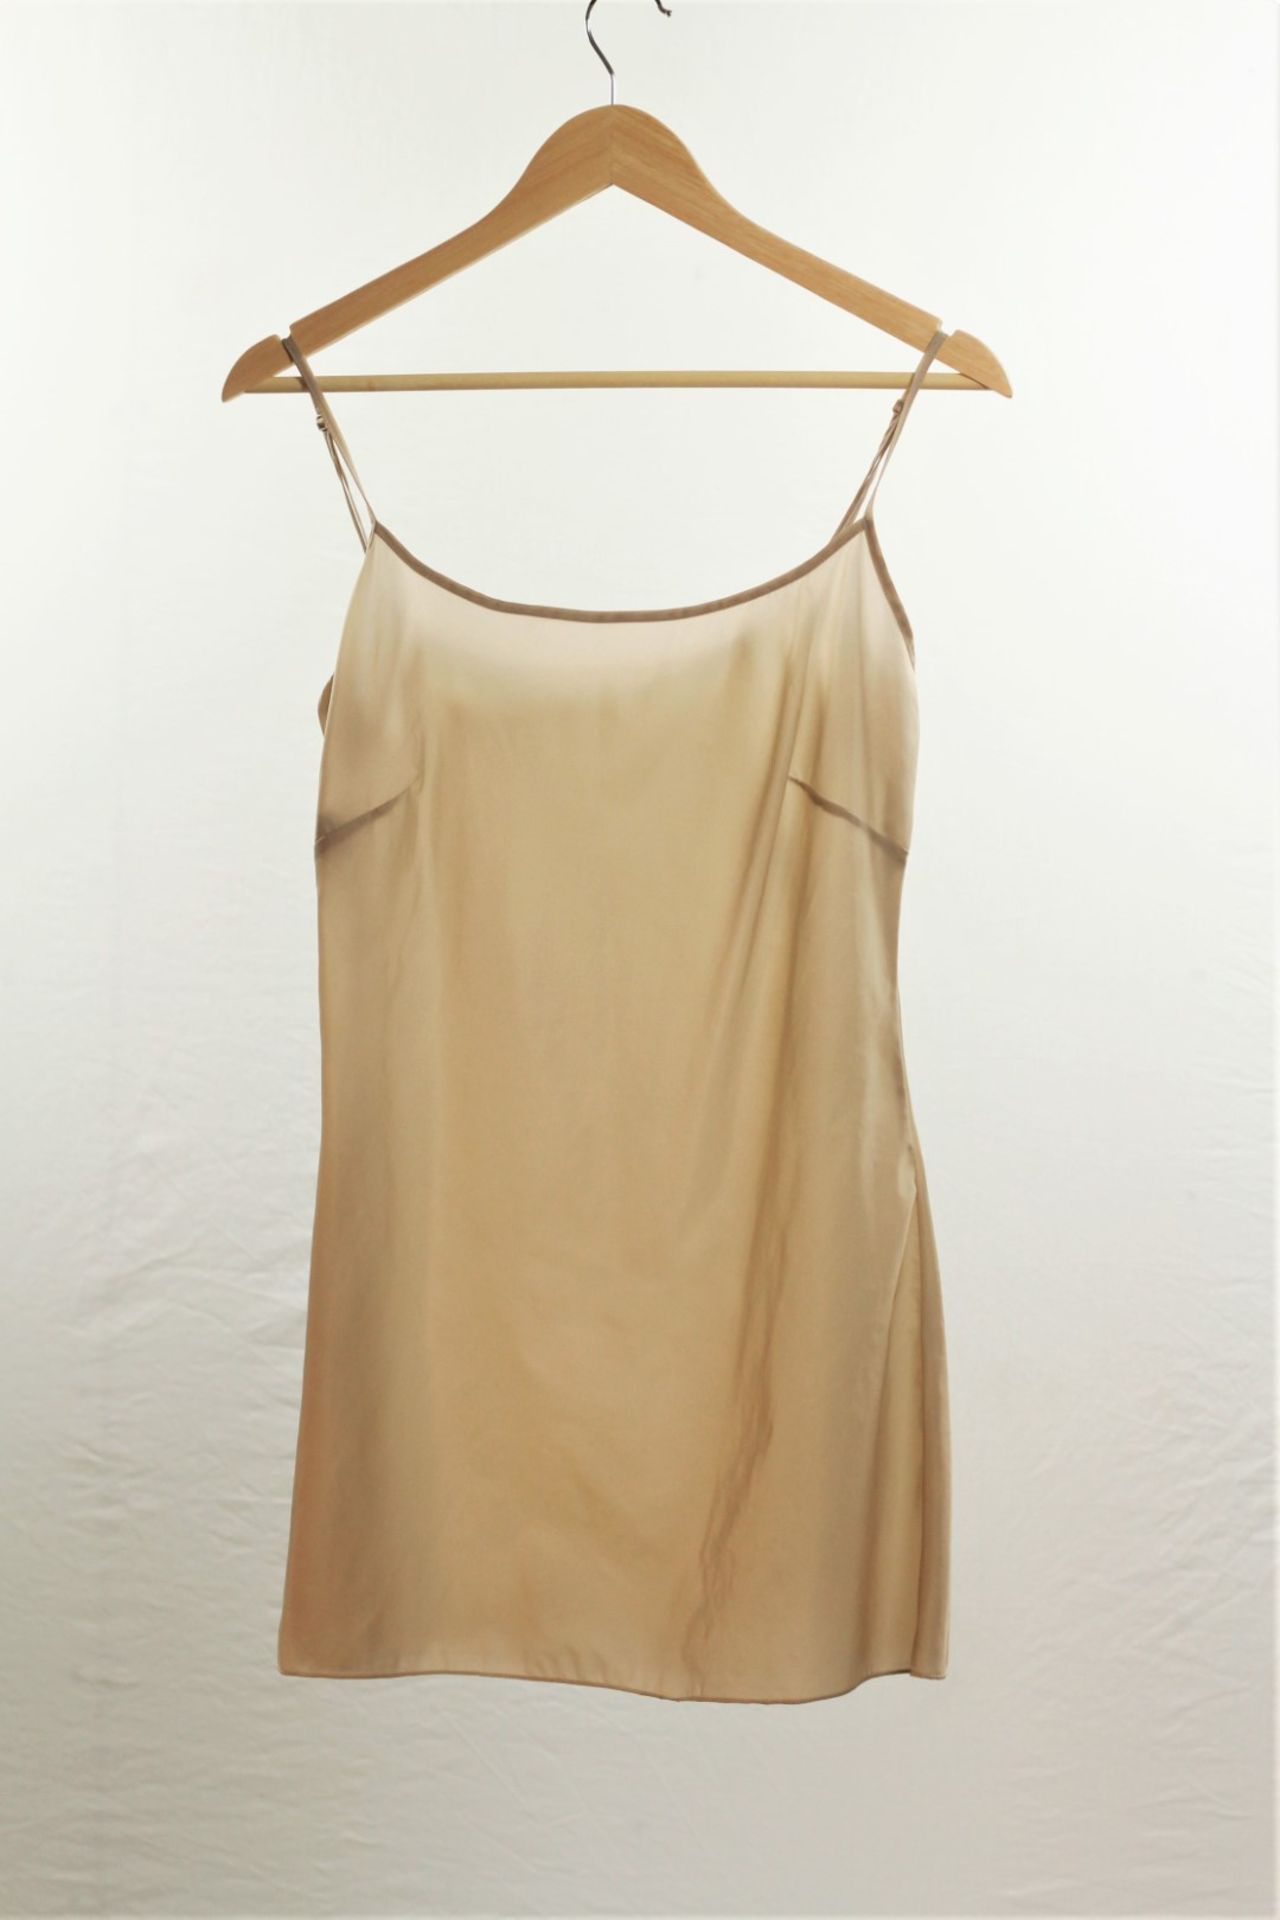 1 x Aeffe Spa Nude Slip - Size: 8 - Material: 100% Nylon - From a High End Clothing Boutique In - Image 2 of 2